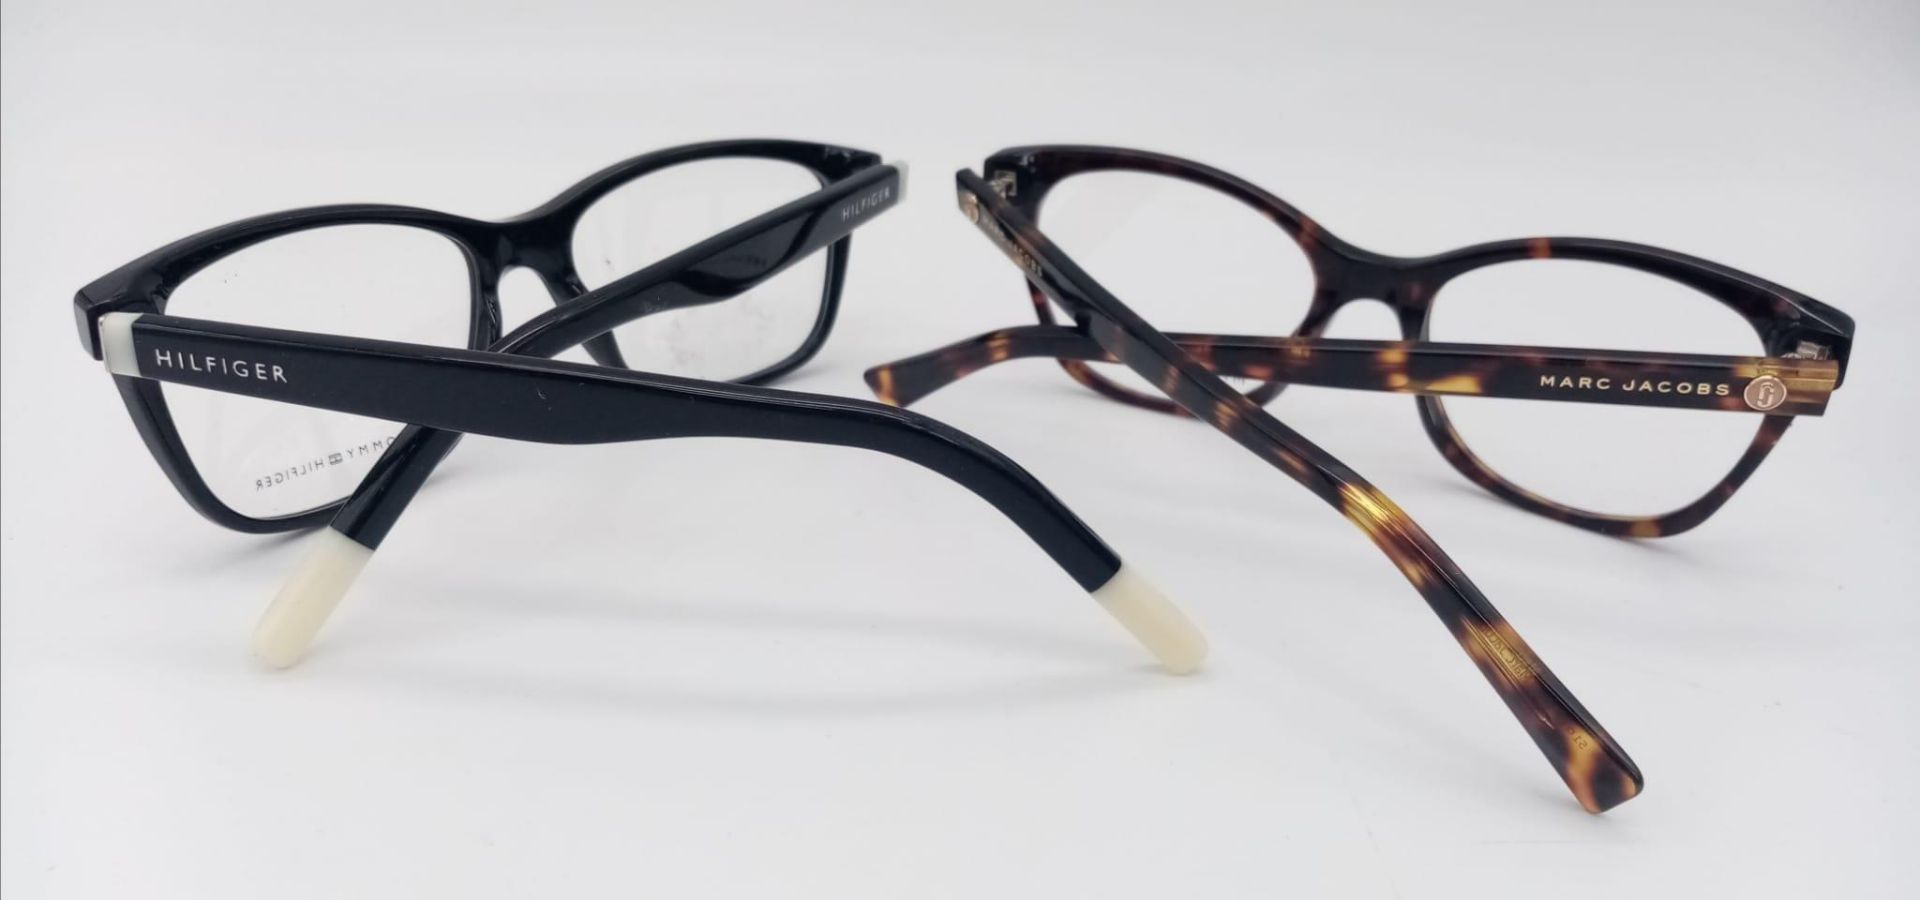 Two Pairs of Designer Glasses - Marc Jacobs and Tommy Hilfiger. - Image 2 of 6